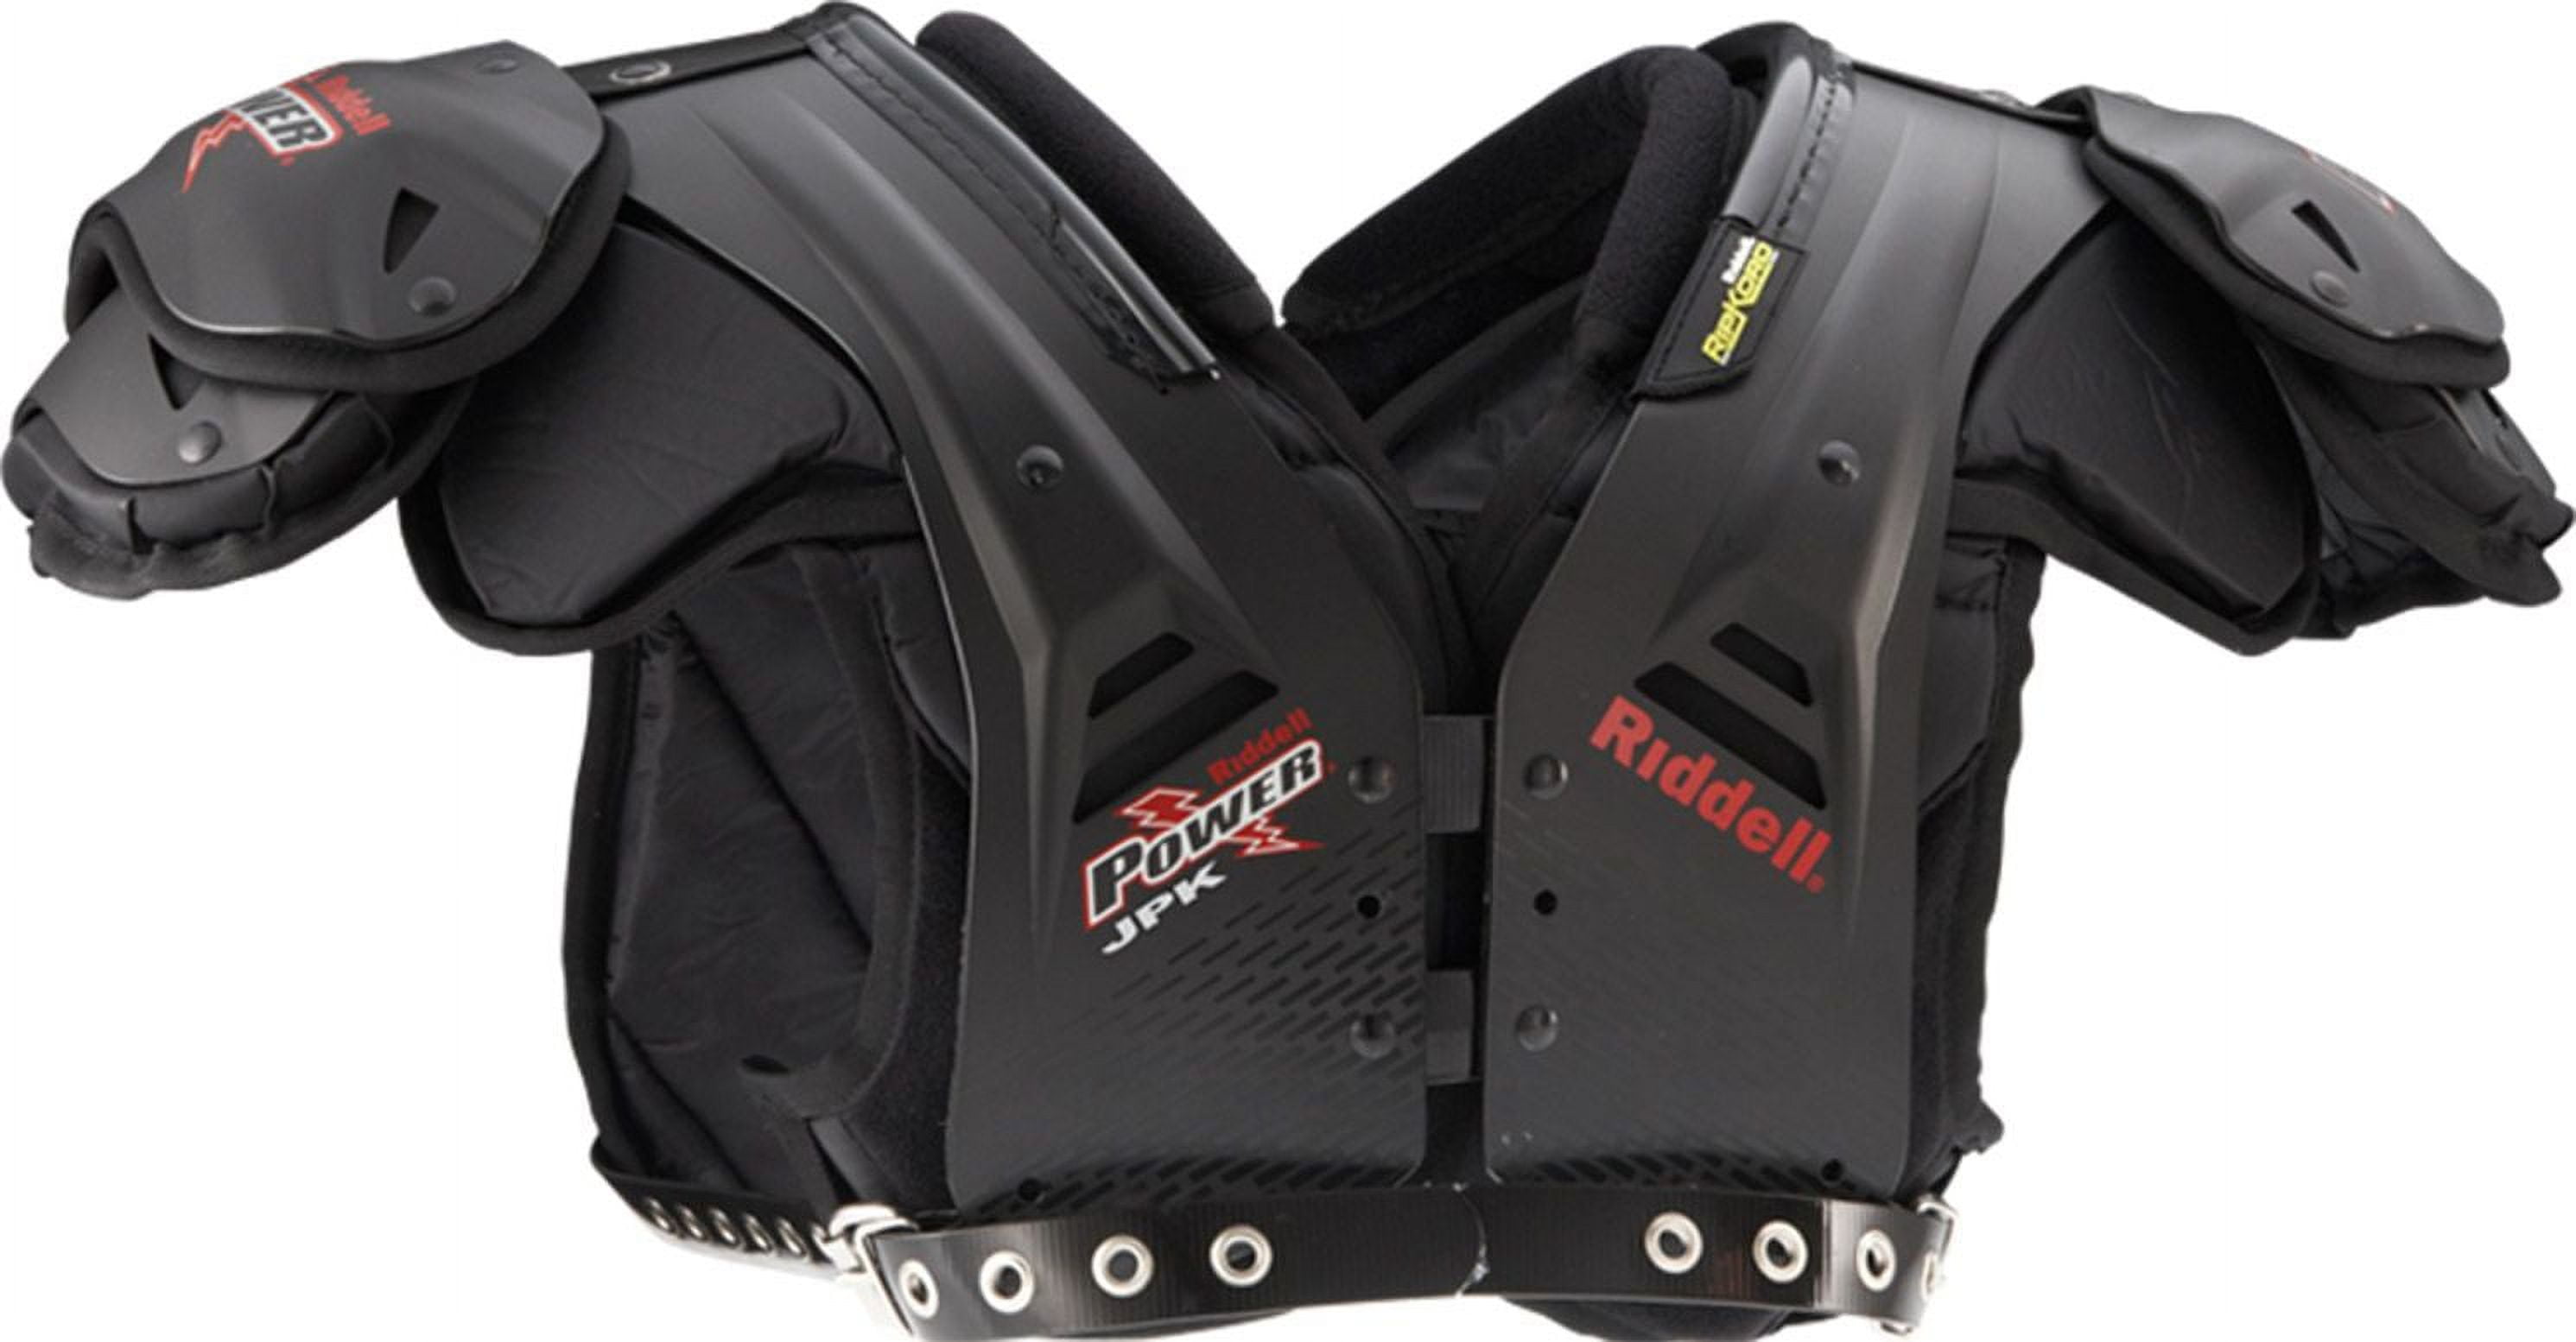 Riddell Power JPX SK Football Shoulder Pads w/Back Plate, Adult Medium  (16-17) - Great Condition!